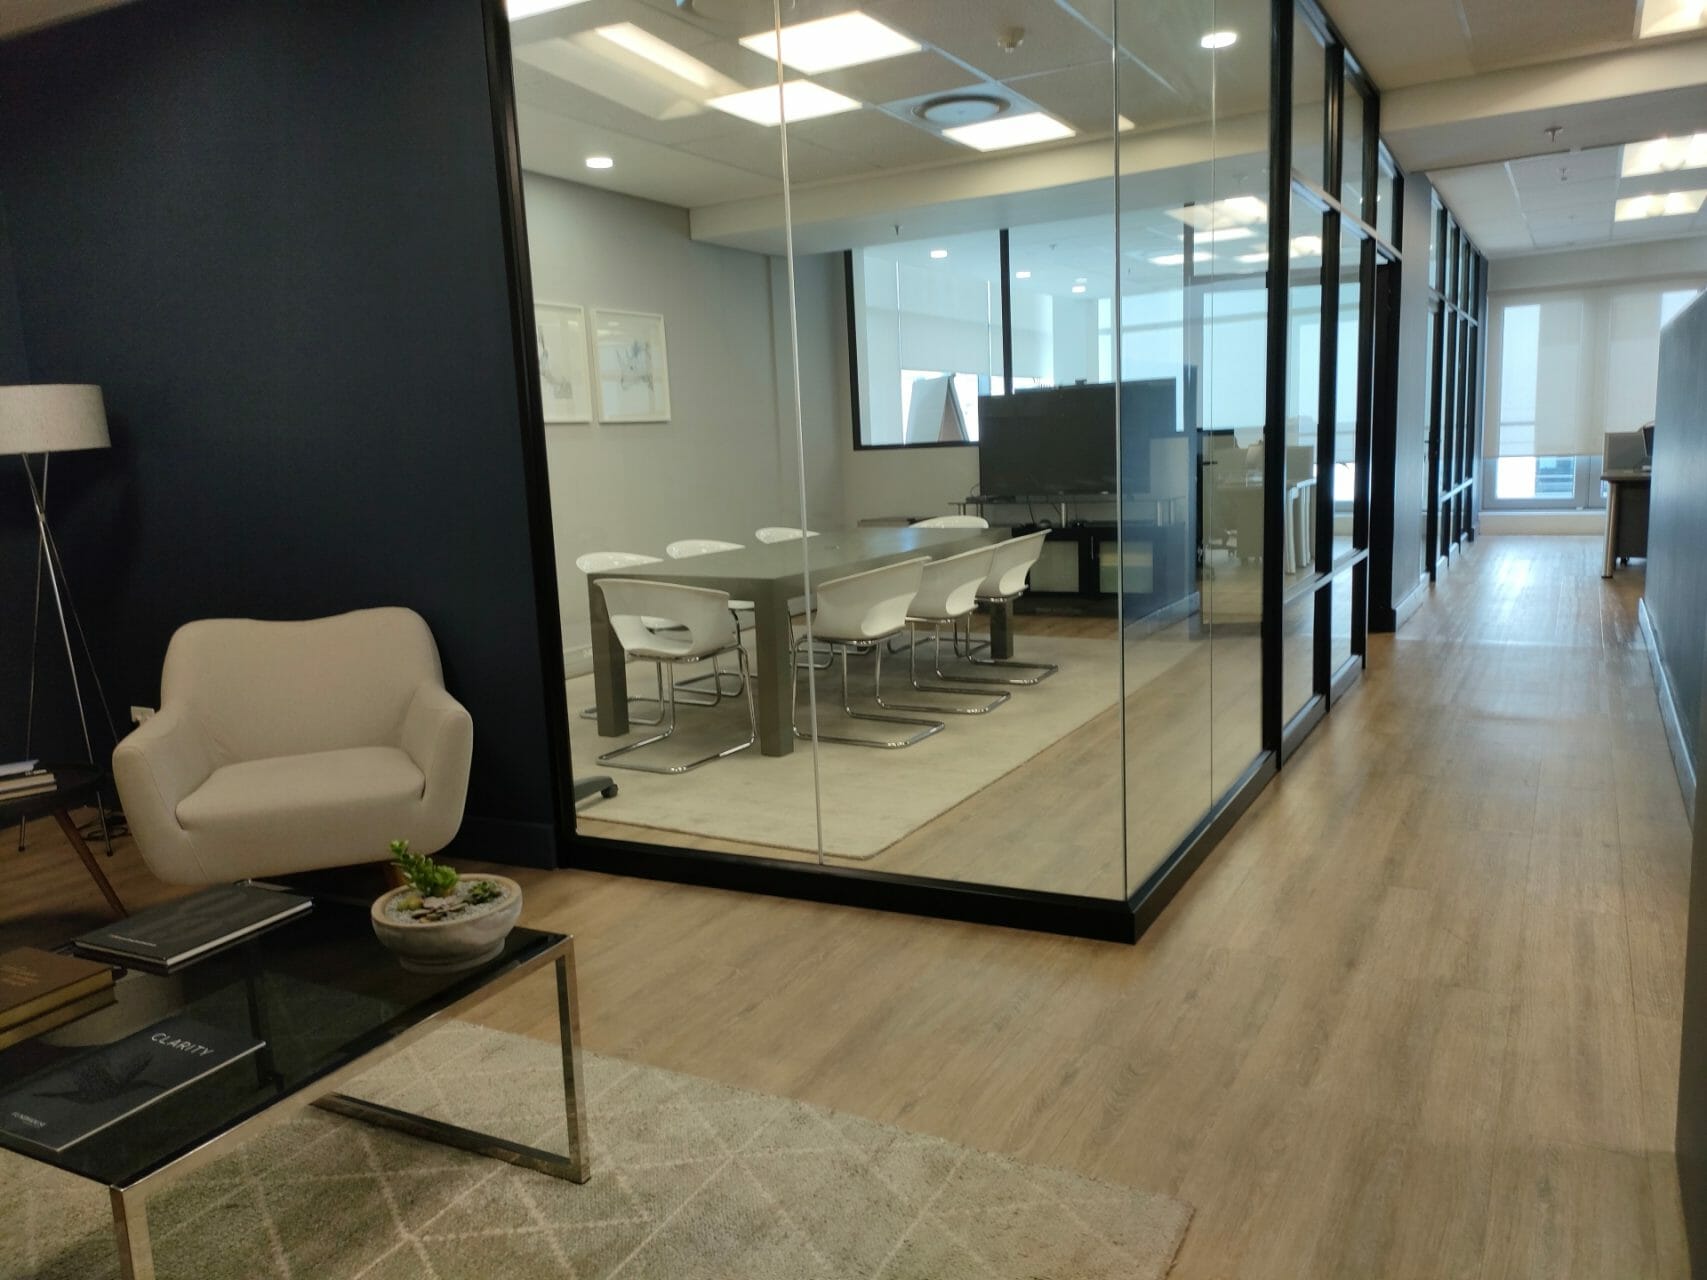 270m² – Montclare 5th floor office space available in the heart of Claremont.